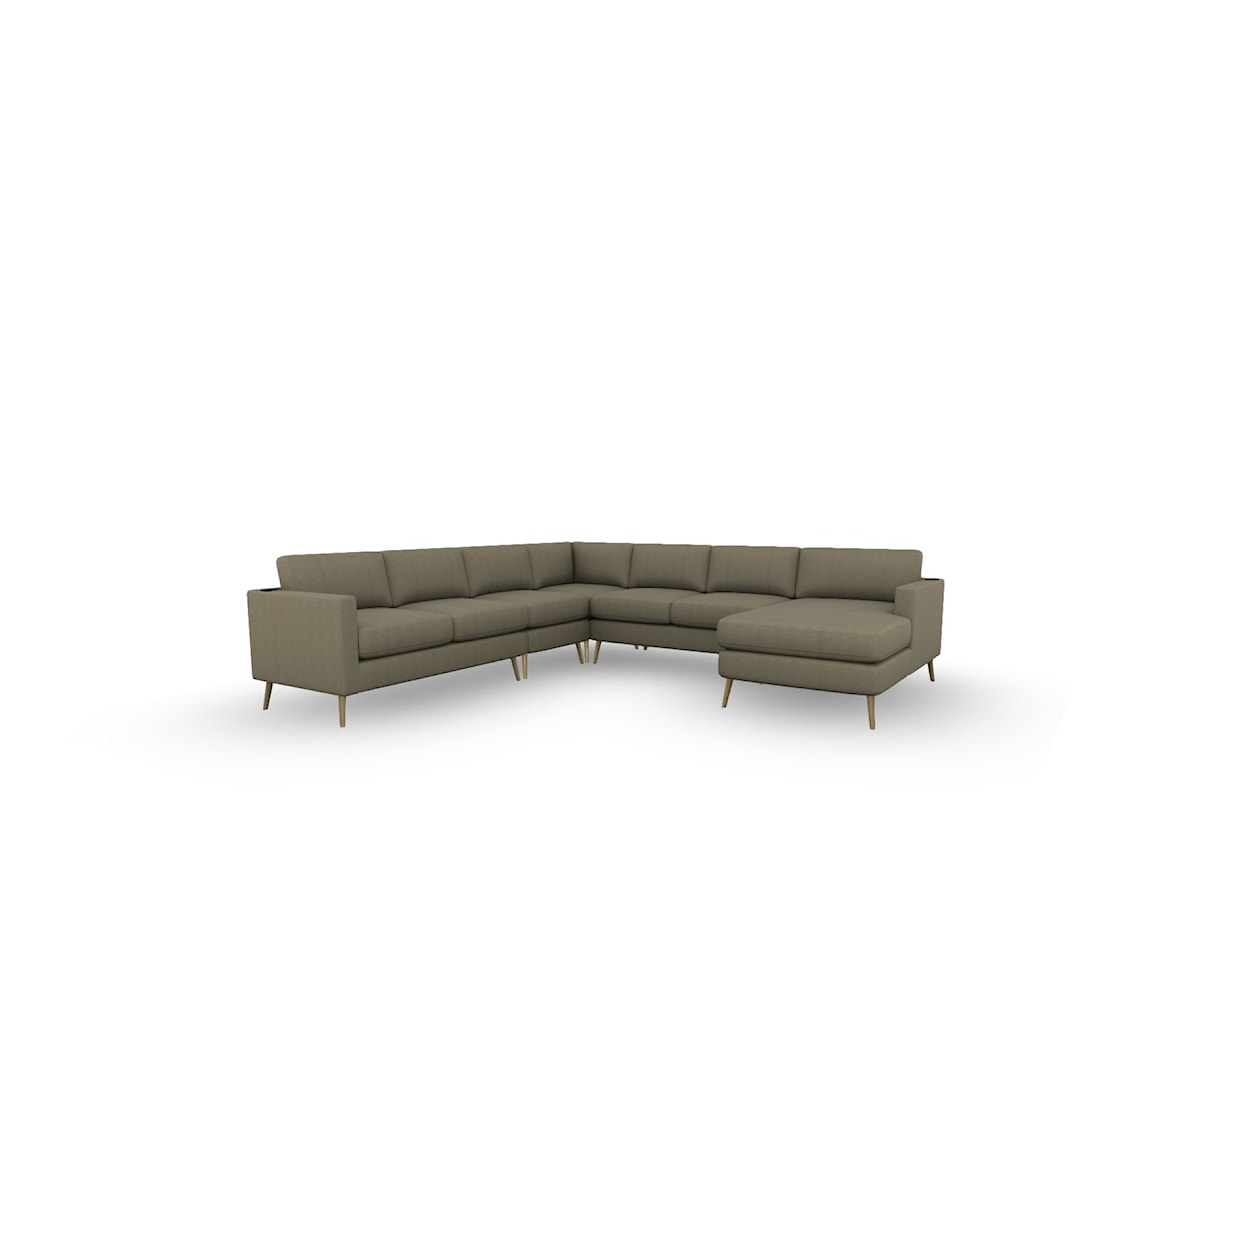 Best Home Furnishings Trafton Sectional Sofas